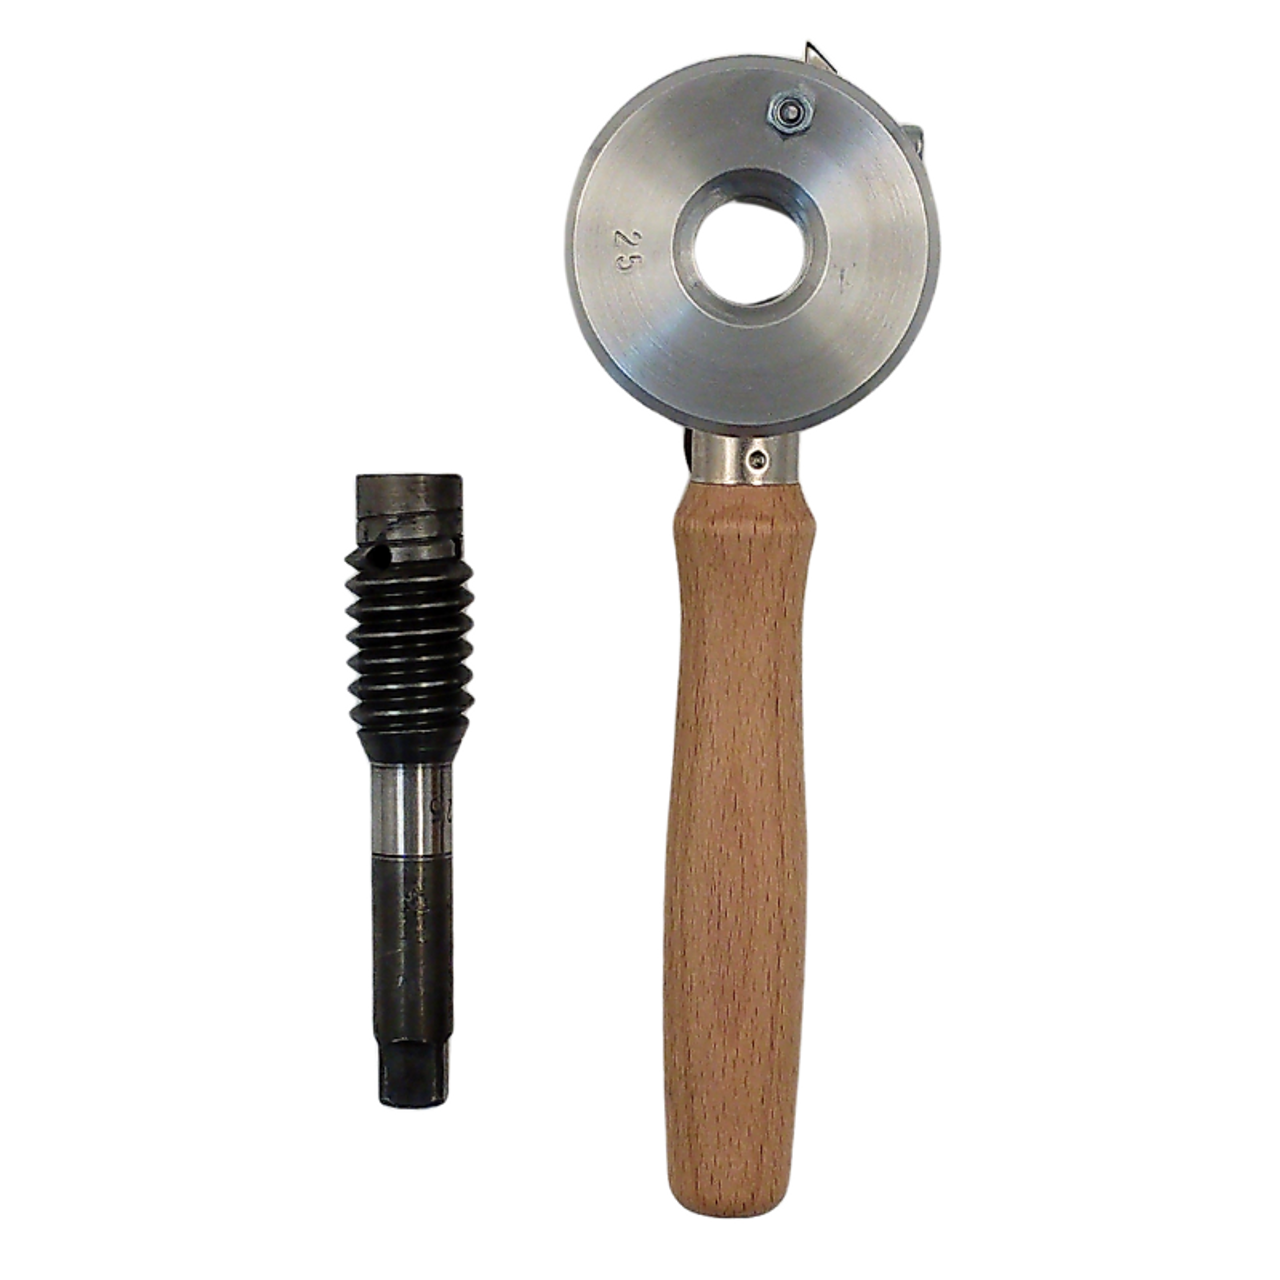 FAMAG Wood Thread Cutters | Supplier of 1895 Thread Cutting in Timber  for 22mm Diameter, Woodworking, Cabinetry, Woodwork Supplies, Trade Supplies and Carpentry